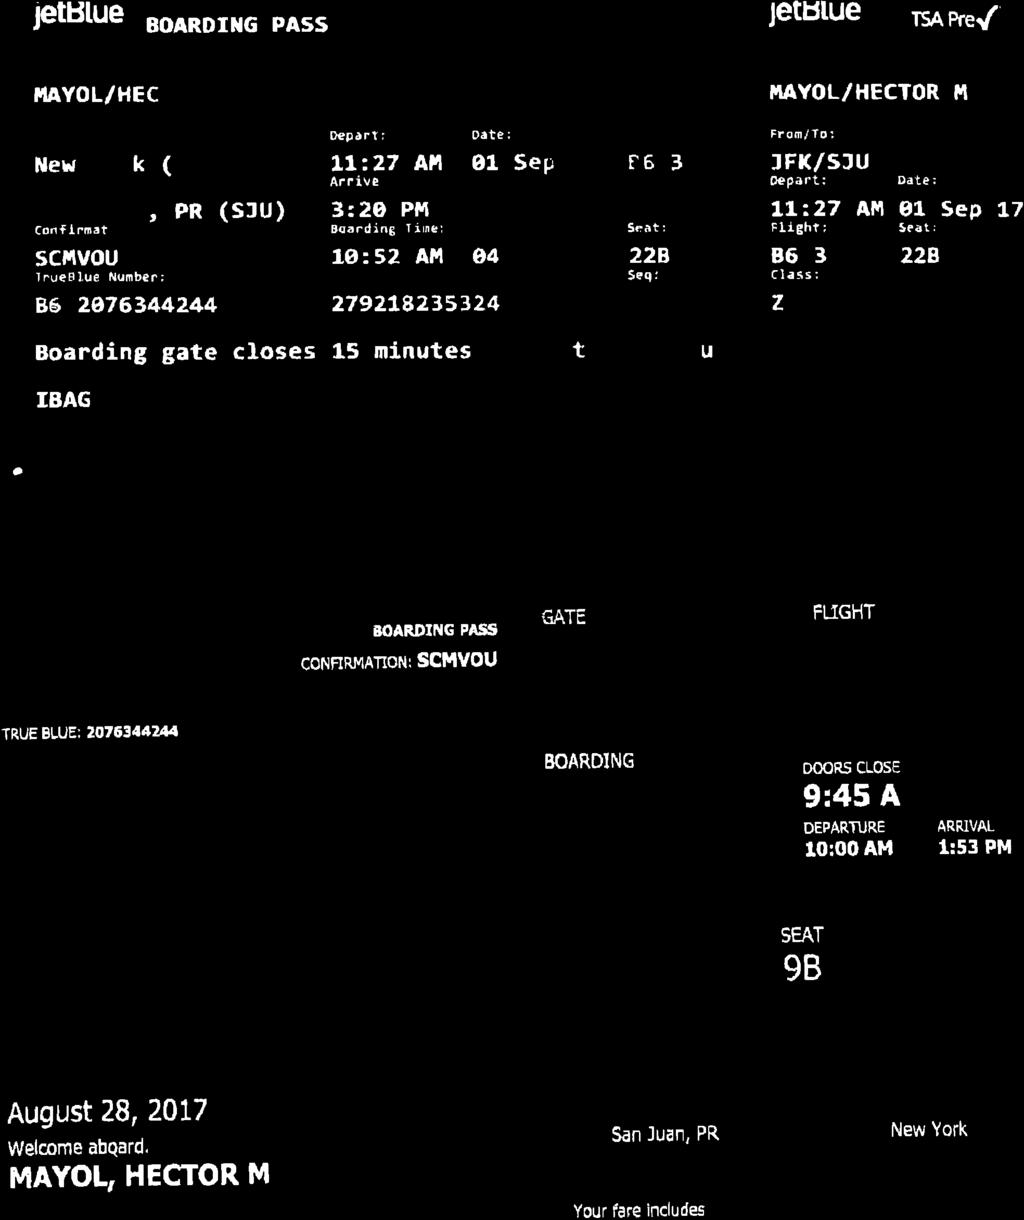 ,, - Case:17-03283-LTS Doc#:1806-5 Filed:11/15/17 Entered:11/15/17 21:06:01 Exhibit E - Detailed Expenses Page 31 of 34 jetblue jetbiue TSAPre/ Name: BOARDING PASS MAYOL/HECTOIcM MAYOL/HECTOR M Name: